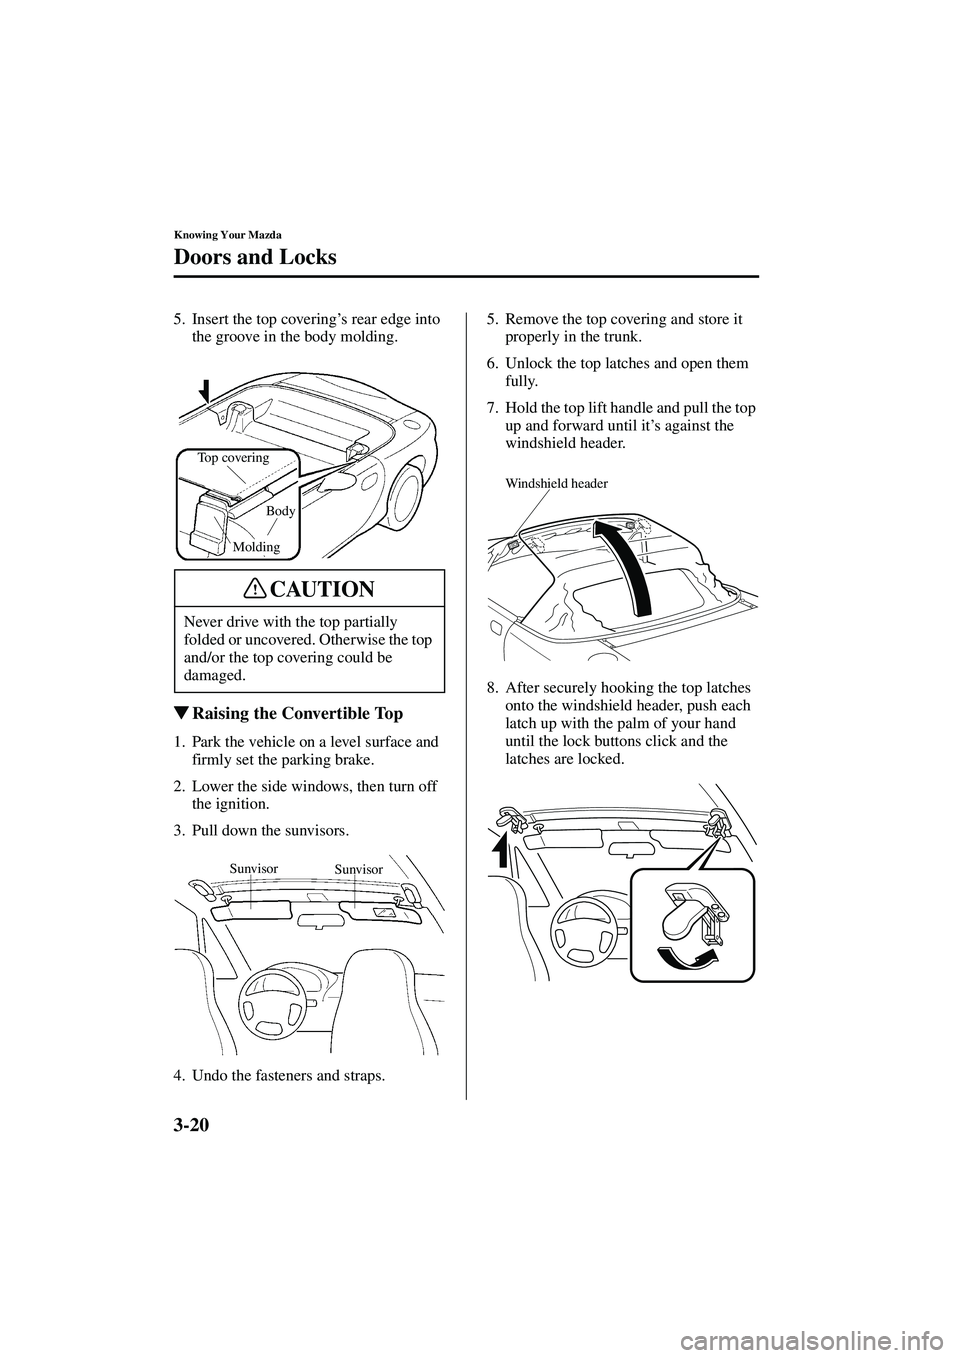 MAZDA MODEL MX-5 MIATA 2003  Owners Manual 3-20
Knowing Your Mazda
Doors and Locks
Form No. 8R09-EA-02G
5. Insert the top covering’s rear edge into 
the groove in the body molding.
 Raising the Convertible Top
1. Park the vehicle on a level